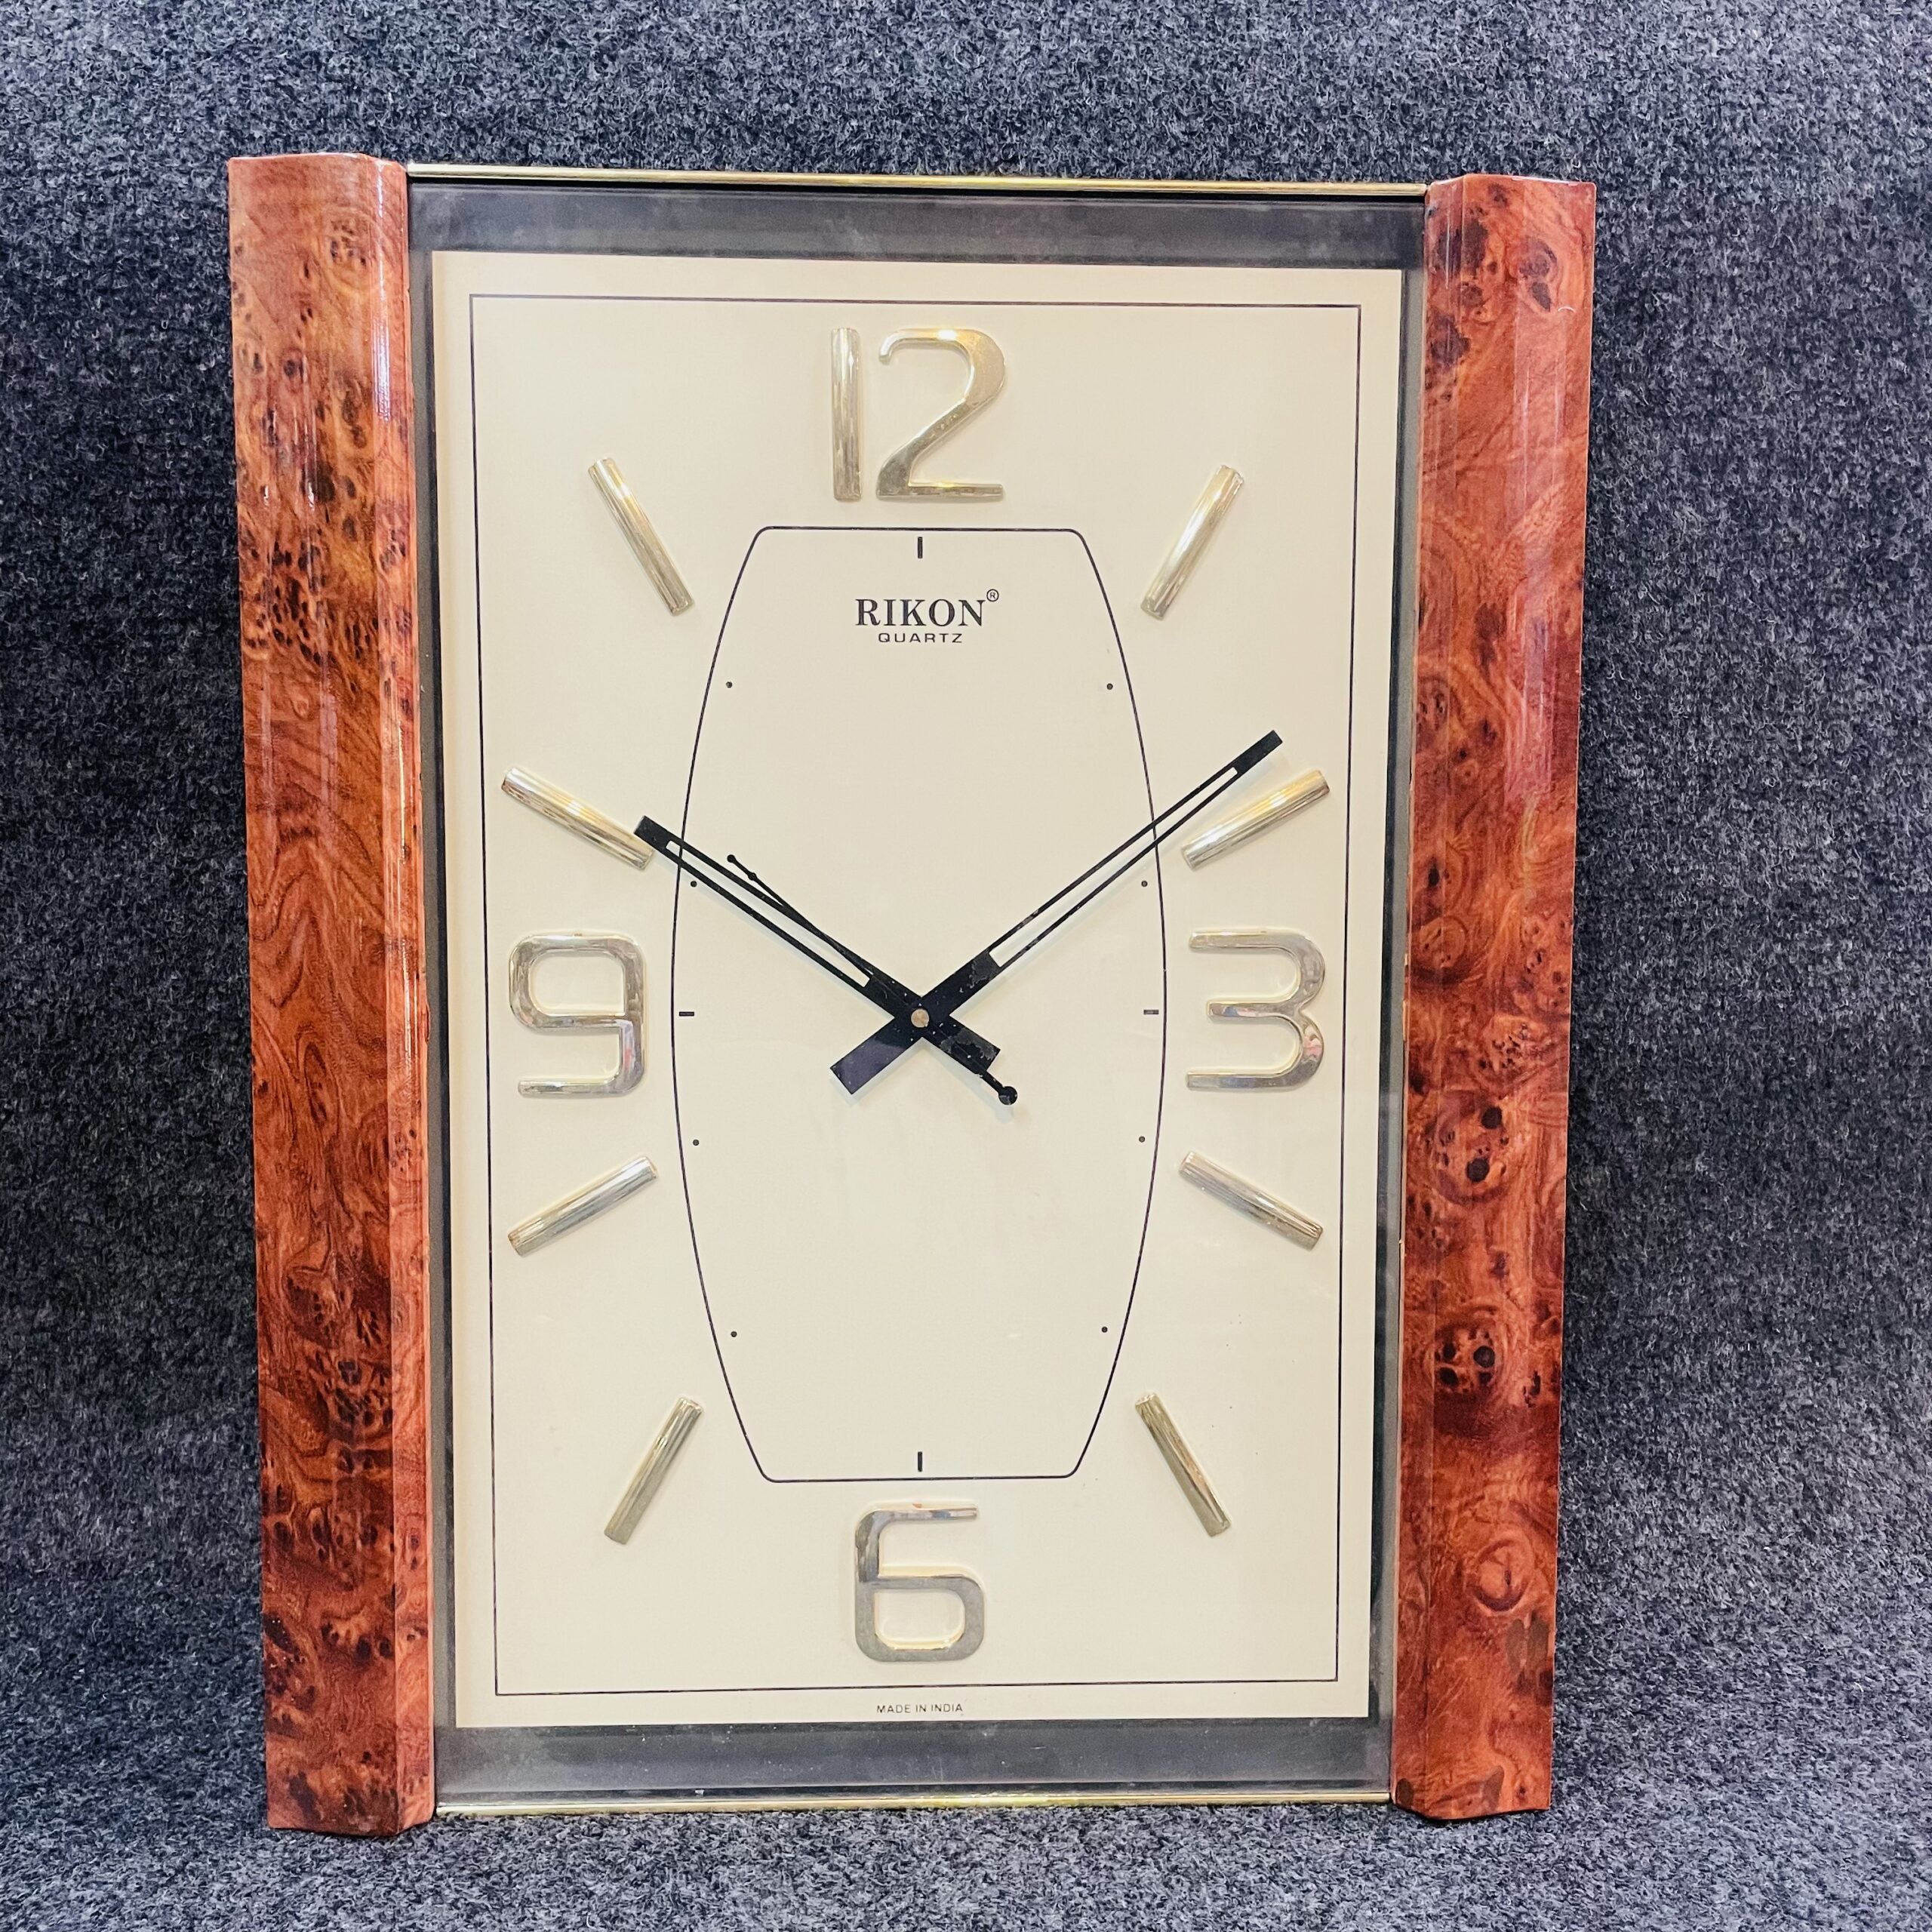 Buy Rikon Quartz Official Designer Big Size Rk 02 (47 cm 47 cm) Wall Clock  for Home, Living Room, and Office - Sweep Silent Moment - Made in India.  (Brown Ivory) Online at Low Prices in India - Amazon.in